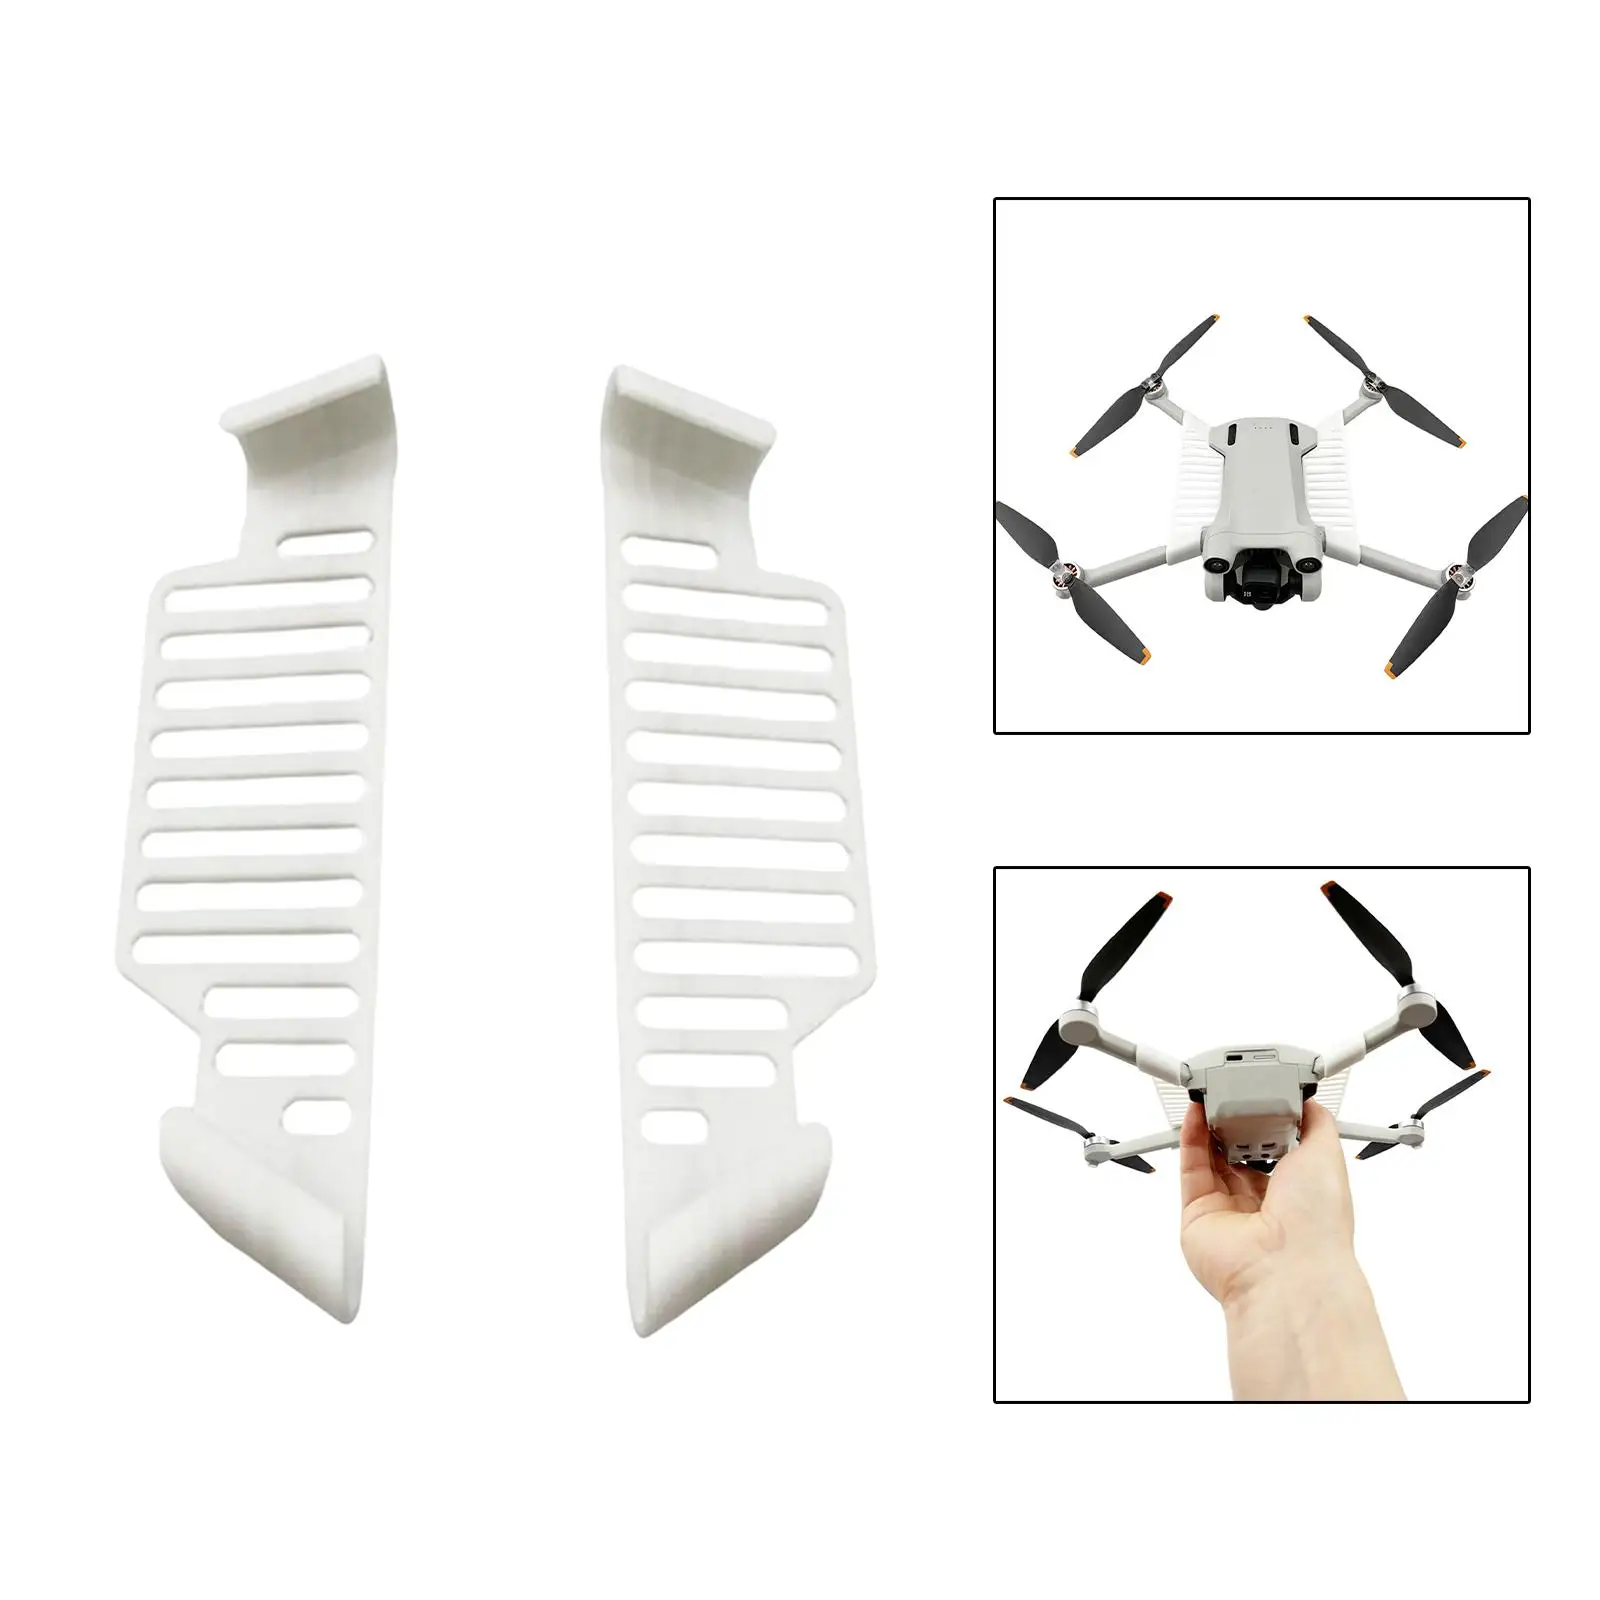 2 Pcs Landing Hand Safety Bracket Hand Protect Supplies Handheld Durable Plastic Stable Landing Hand Safety Gear for DJI Mini